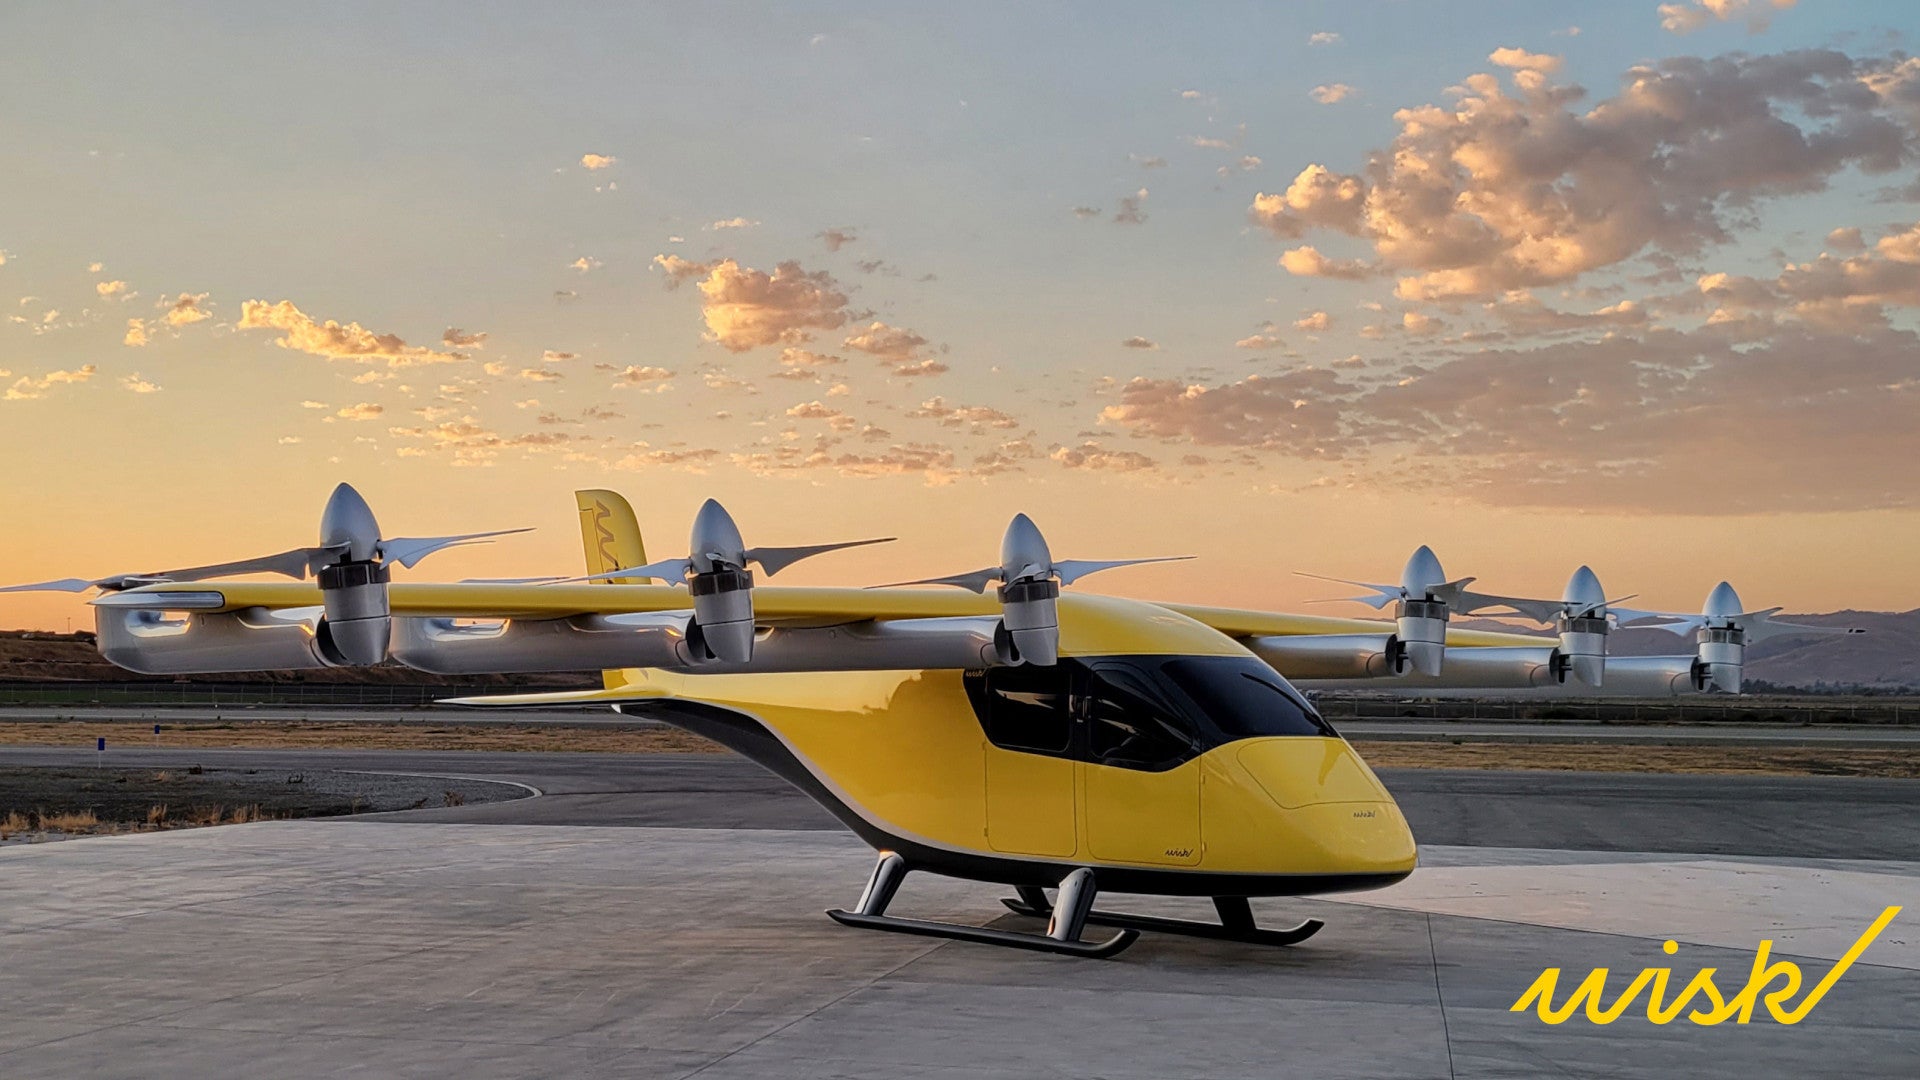 Wisk Aero to Display Air Taxi at EAA AirVenture in Oshkosh